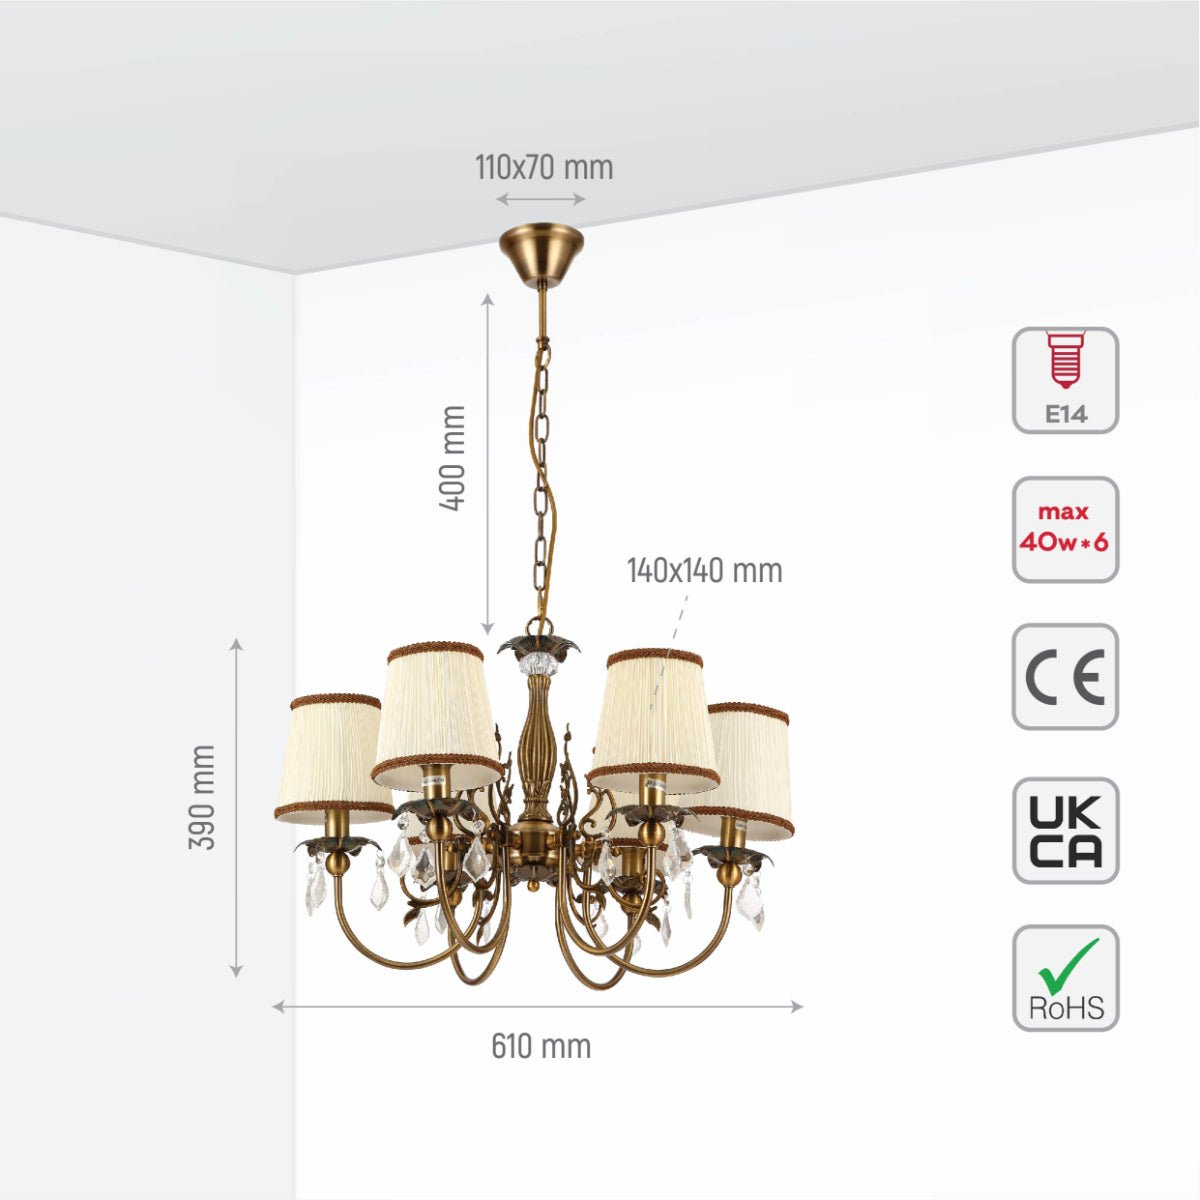 Size and specs of Antique Brass Finishing Metal Body Off White Shade Candle Vintage Crystal Ceiling Light with E14 | TEKLED 156-18202